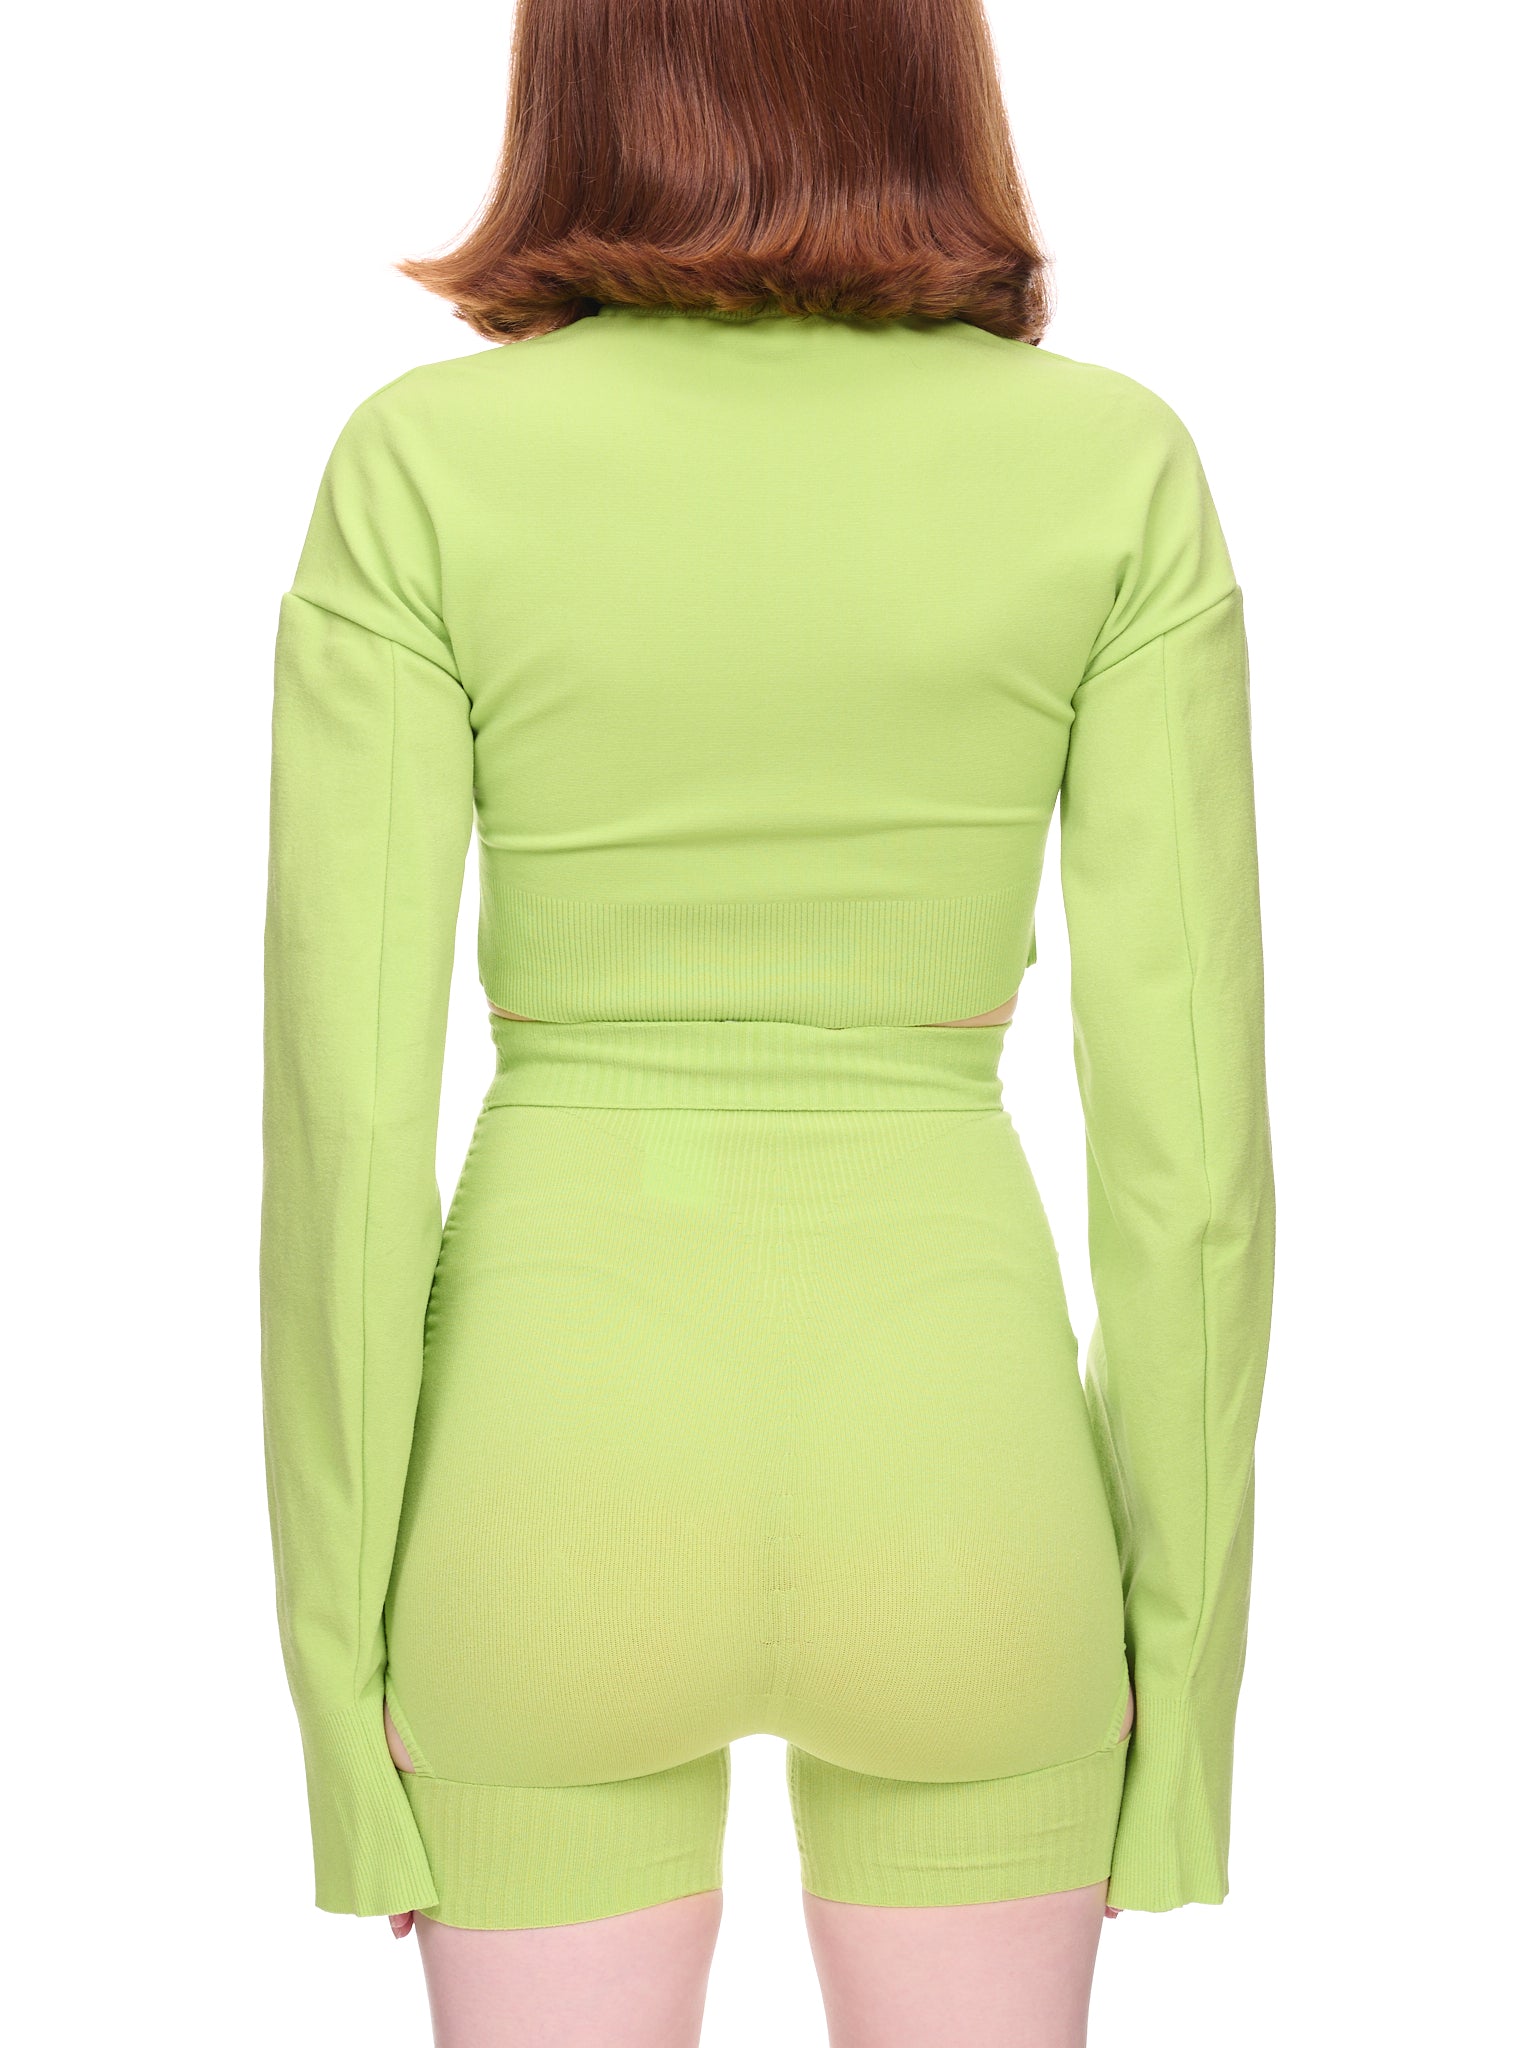 Alessandro Vigilate Cut-Out Cropped Sweater | H.Lorenzo - back